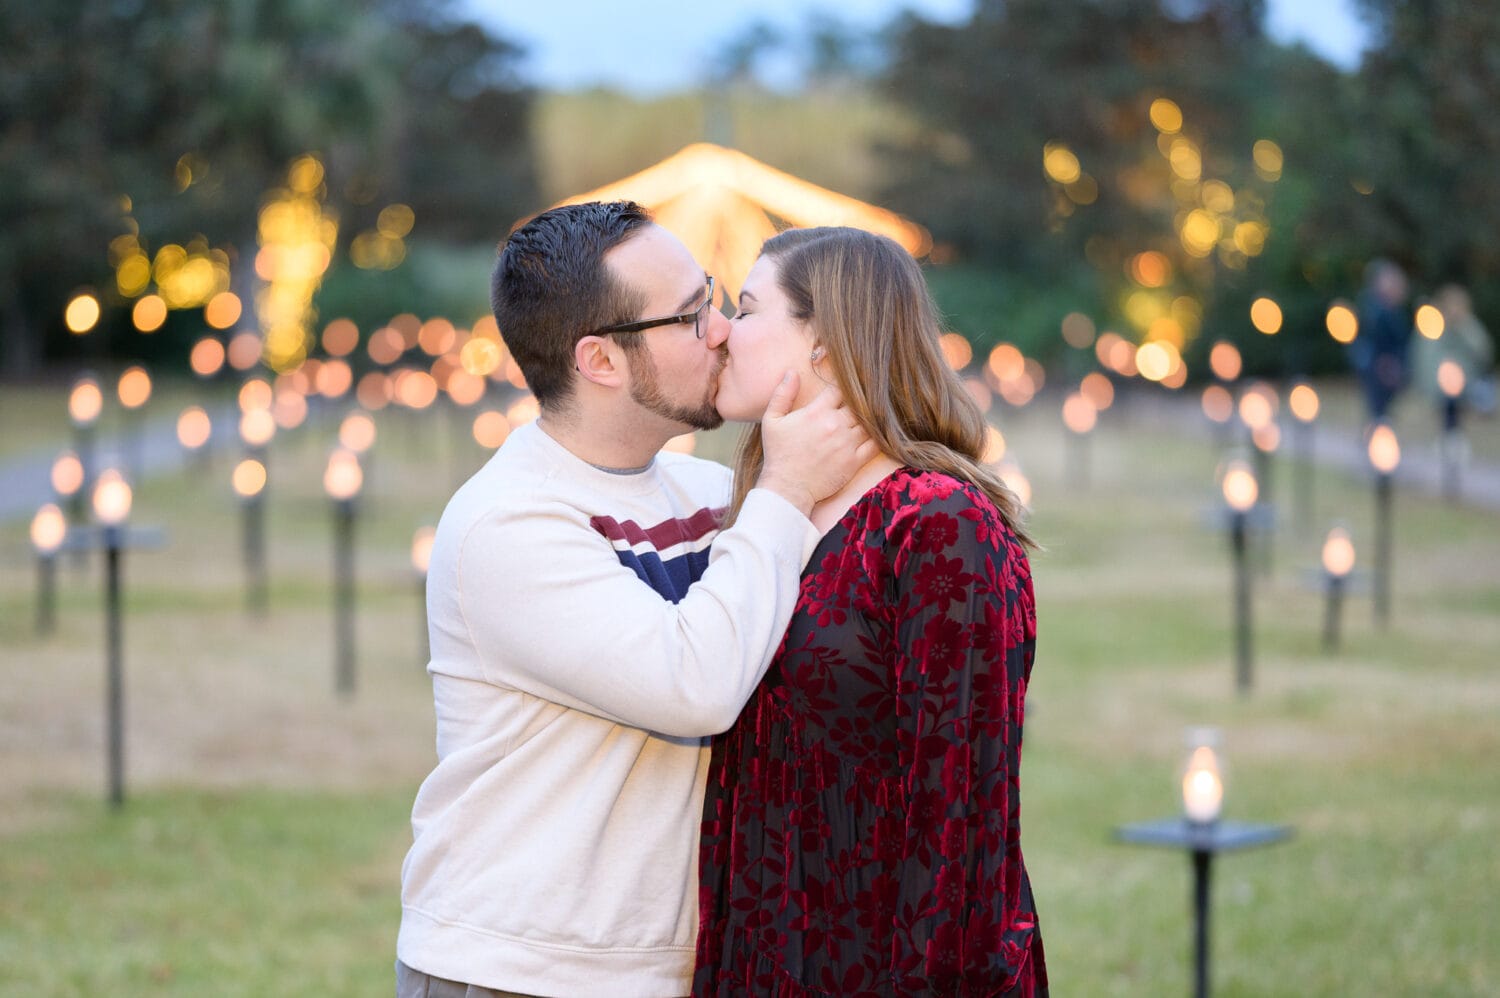 Kiss with lots of candles in the background - Brookgreen Gardens